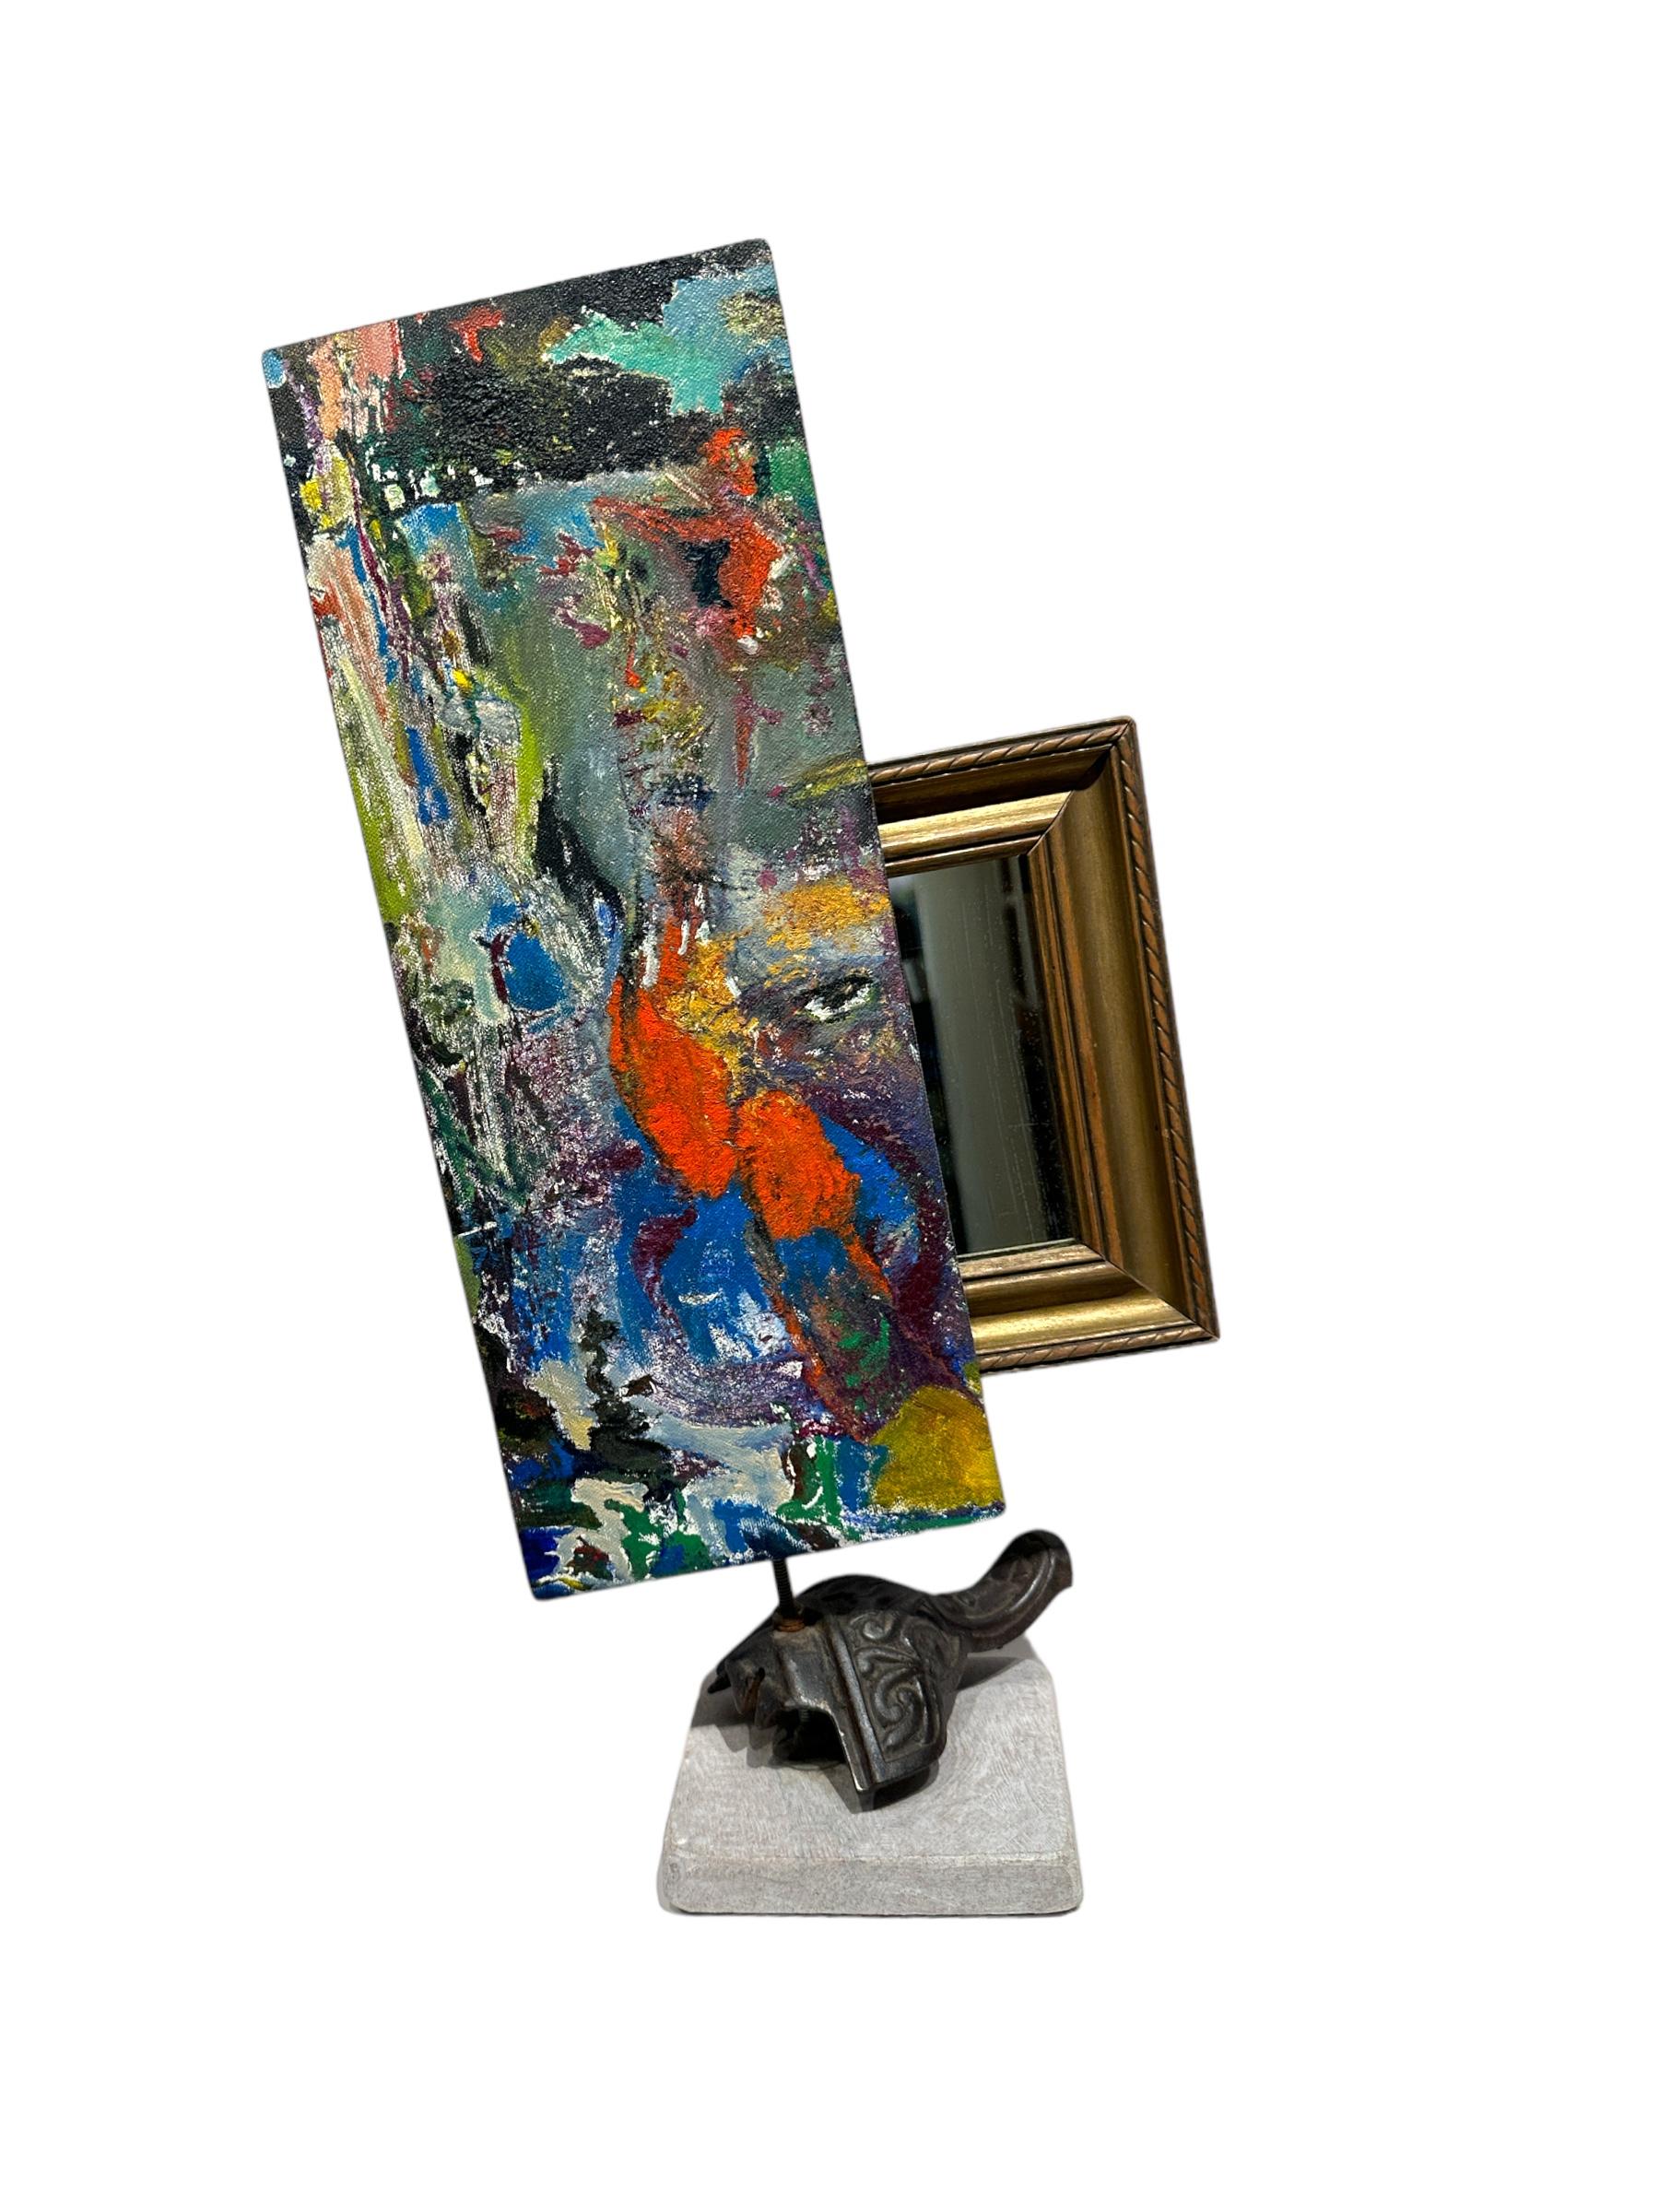 Self-taught artist John Seubert, AKA John Dolly, repurposes objects he uncovers as he rehabs older homes in Chicago. Here, a framed mirror is hinged to the back of a small abstract painting. When 